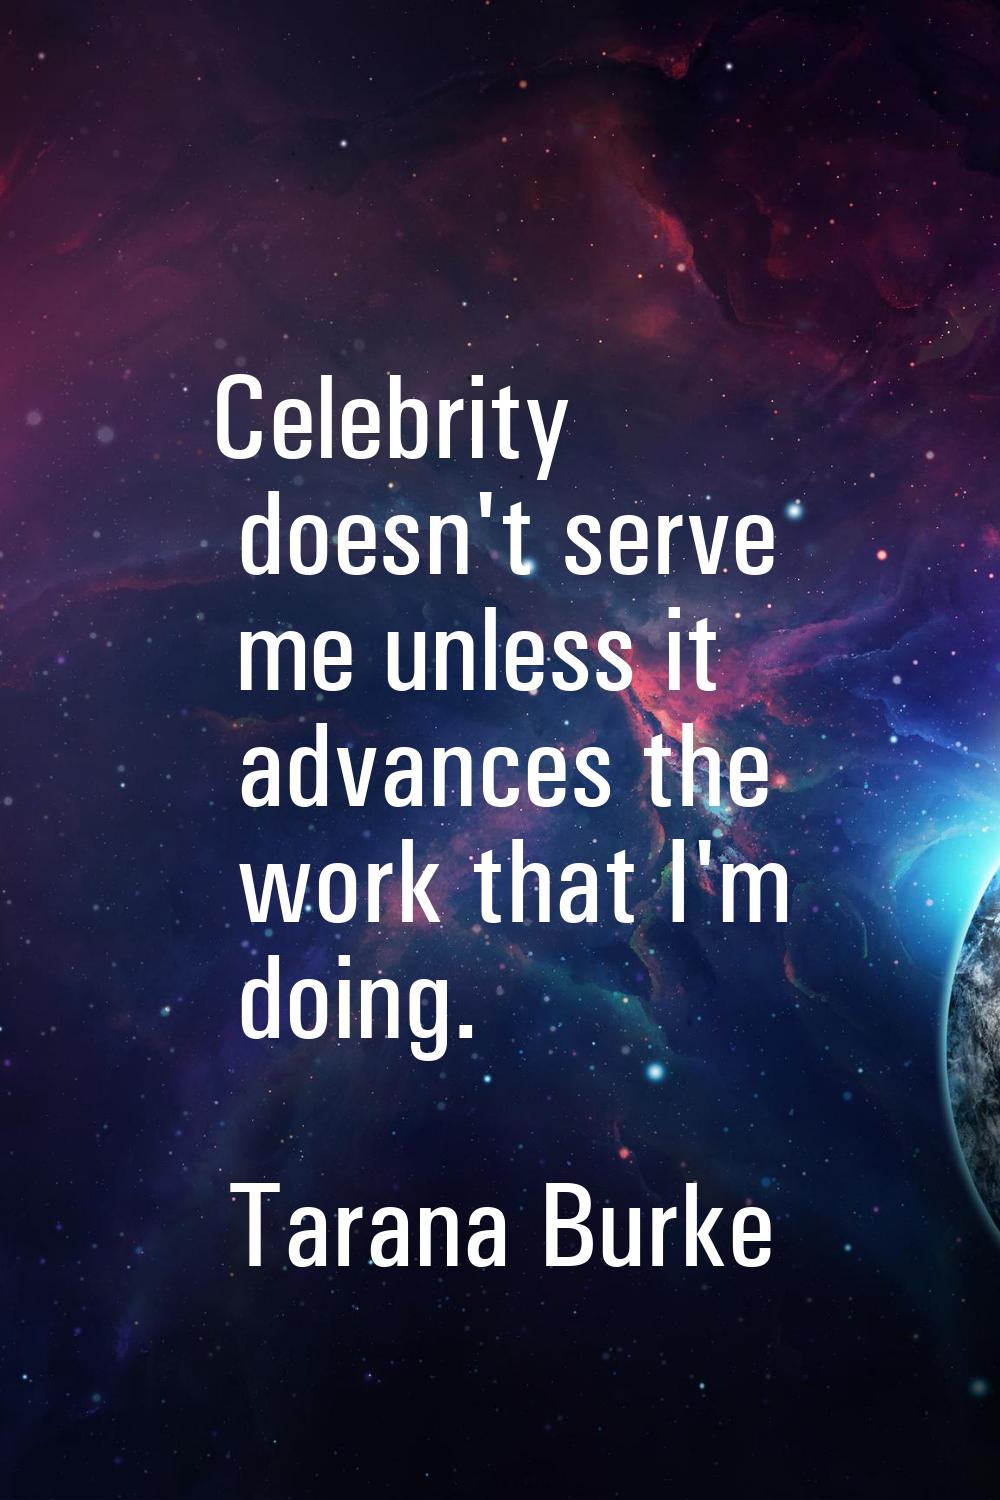 Celebrity doesn't serve me unless it advances the work that I'm doing.